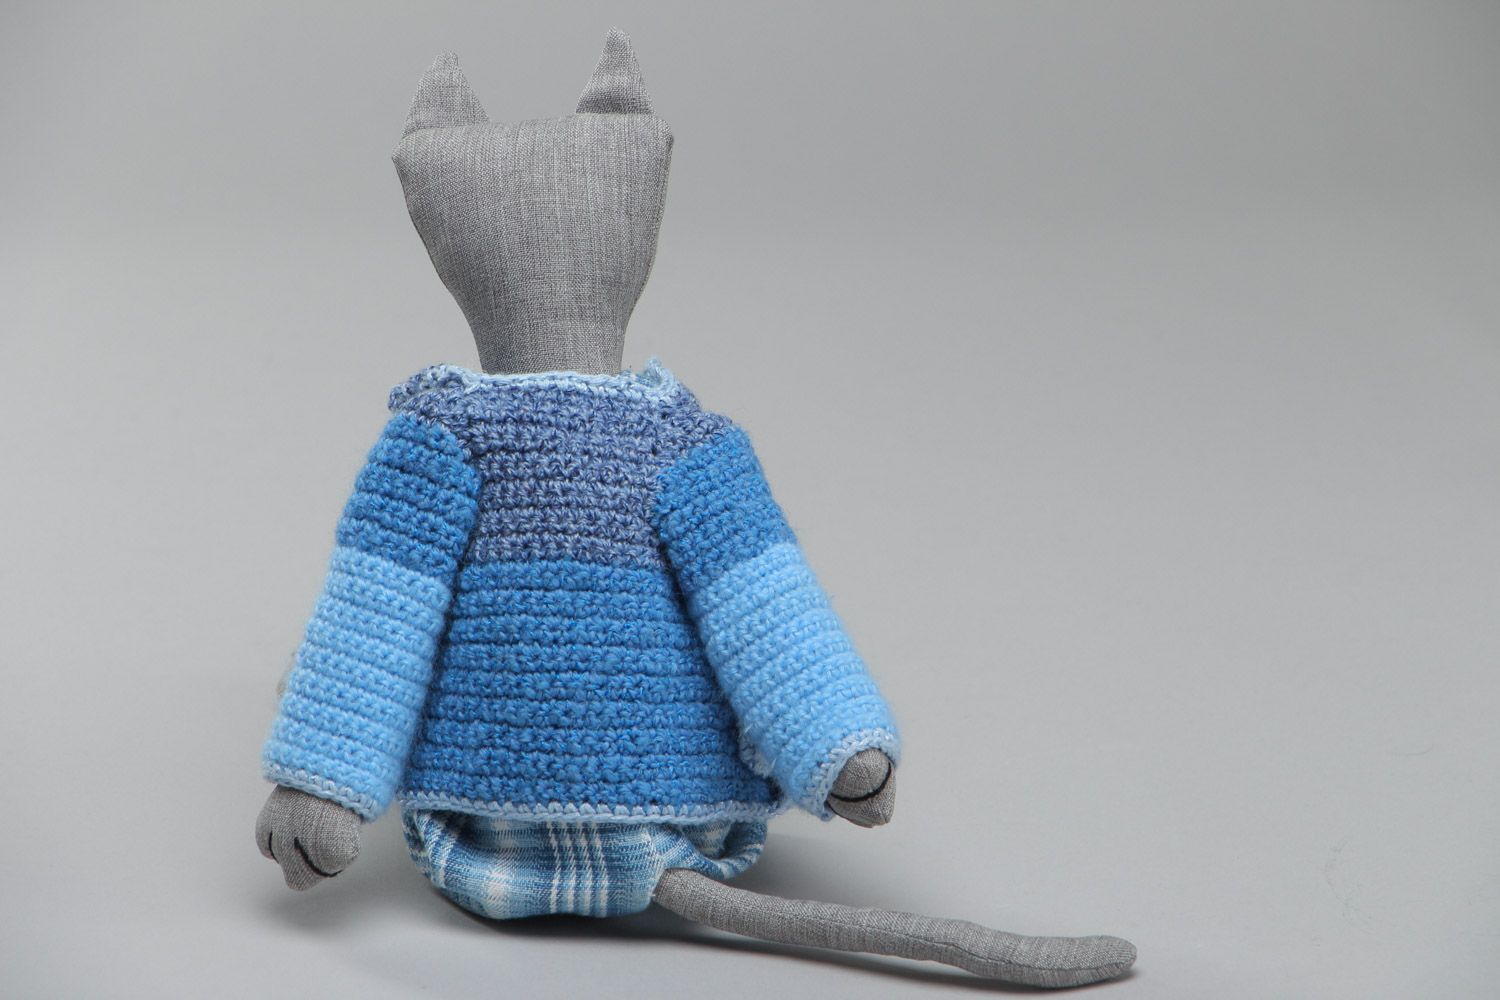 Handmade soft toy sewn of cotton cute gray cat in crocheted blue jacket photo 4